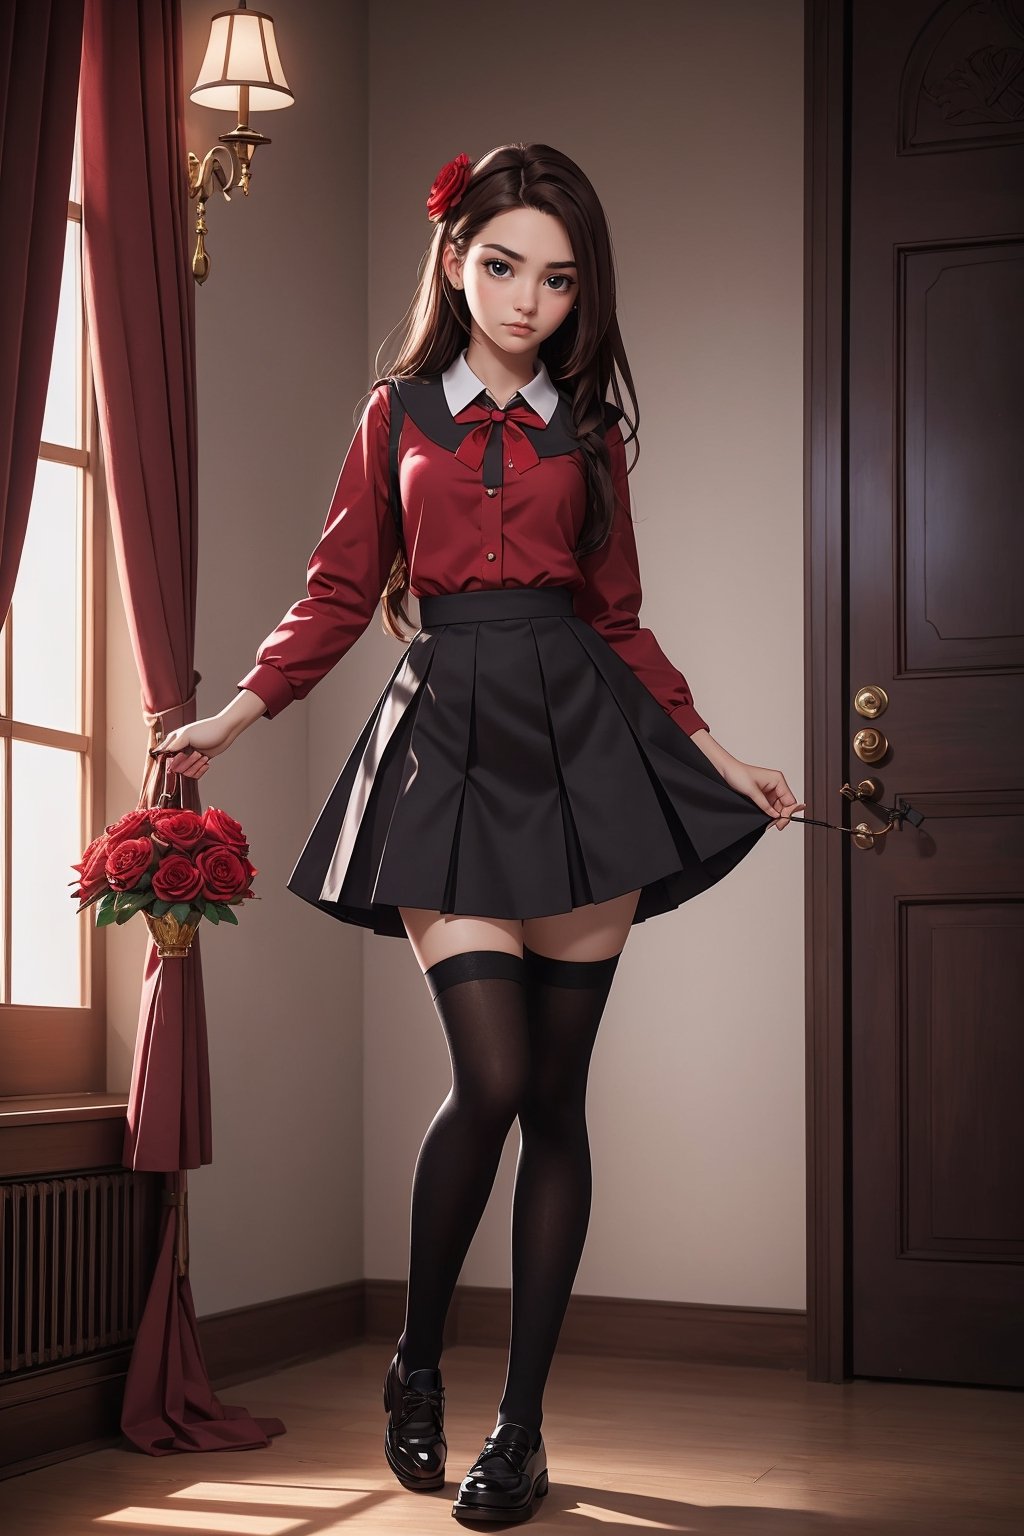  student clothes, beautiful, good hands, full body, good body, 18 year old girl body, school shoes, school skirt, black shoes, sexy pose, shoes_black, with  school_shoes_black, arcane style, clothes with accessories, denier tights in beige, stockings_colorbeige, brown hair, straight hair, fair skin, light eyes, red flower in the girl's hair,1girl,glitter,shiny,Marionette,
Red dress